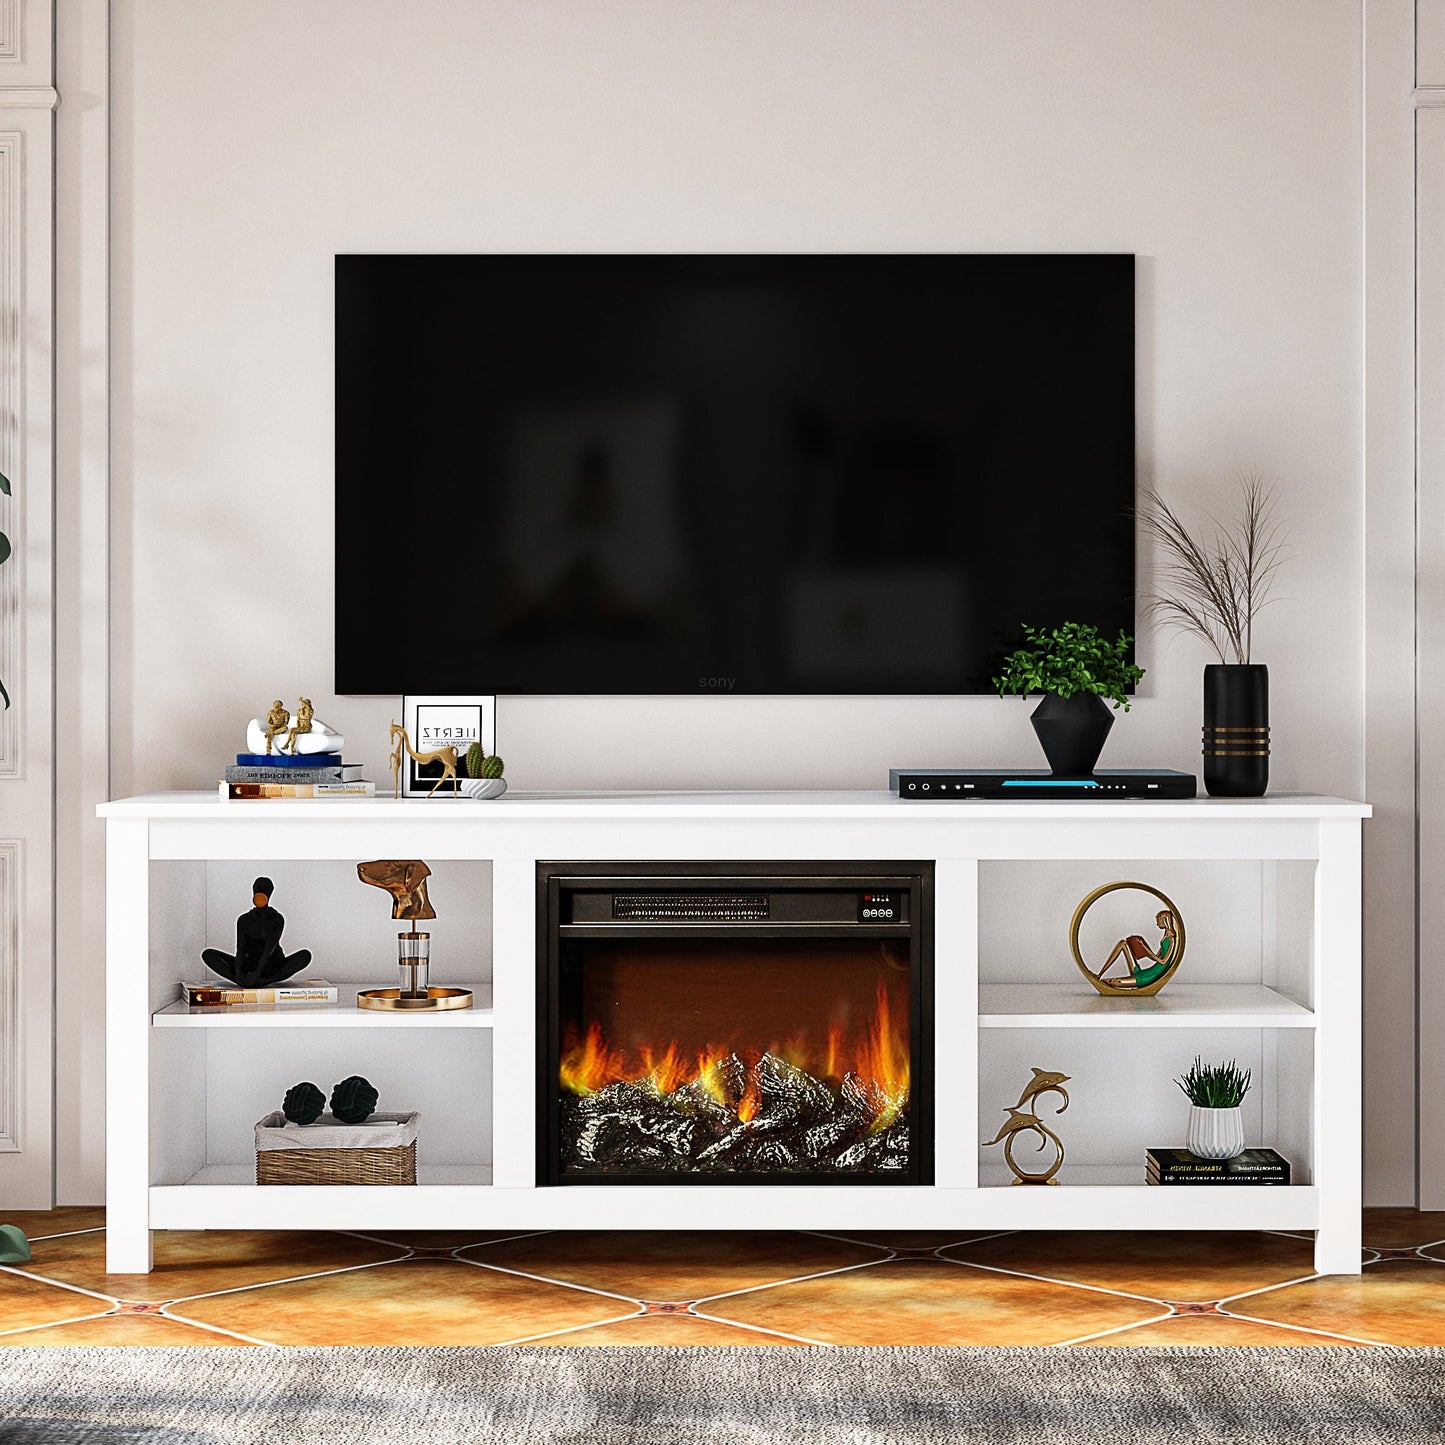 SYNGAR 58" TV Stand for TVs up to 65 inch, with Fireplace, Retro Farmhouse TV Cabinet with Storage, Fireplace TV Stand for Living Room, Entertainment Center TV Cabinet, Espresso, D3186